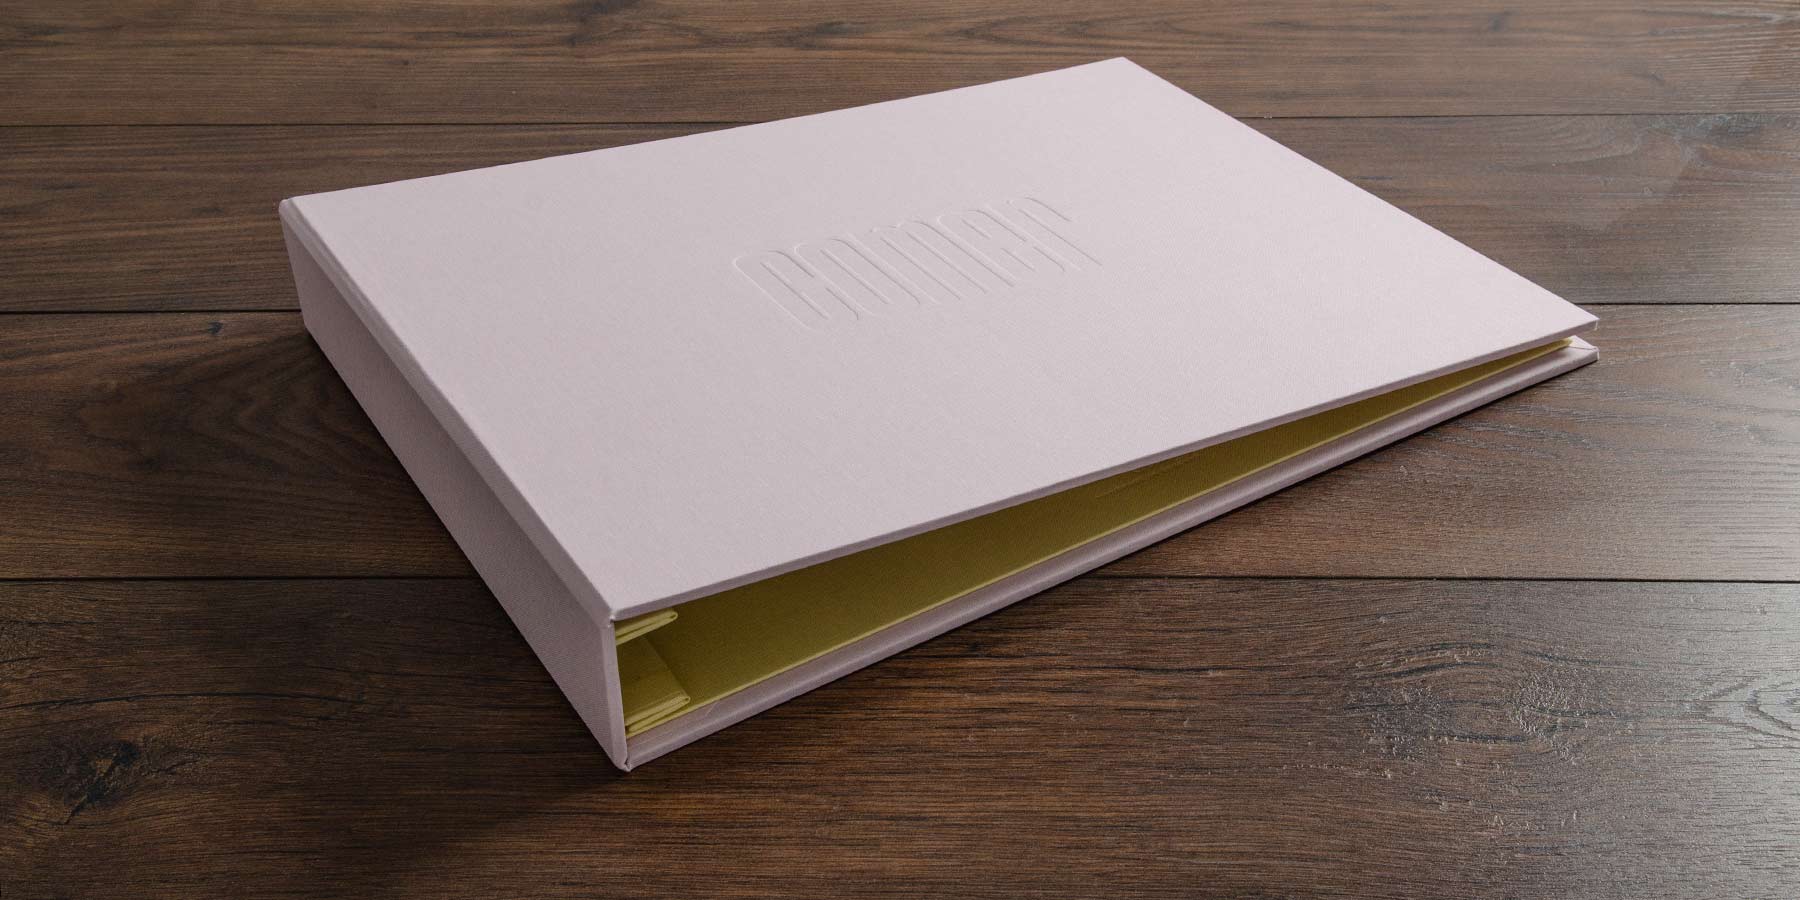 custom photography portfolio book in calamine and yellow backcloth for award winning photographer